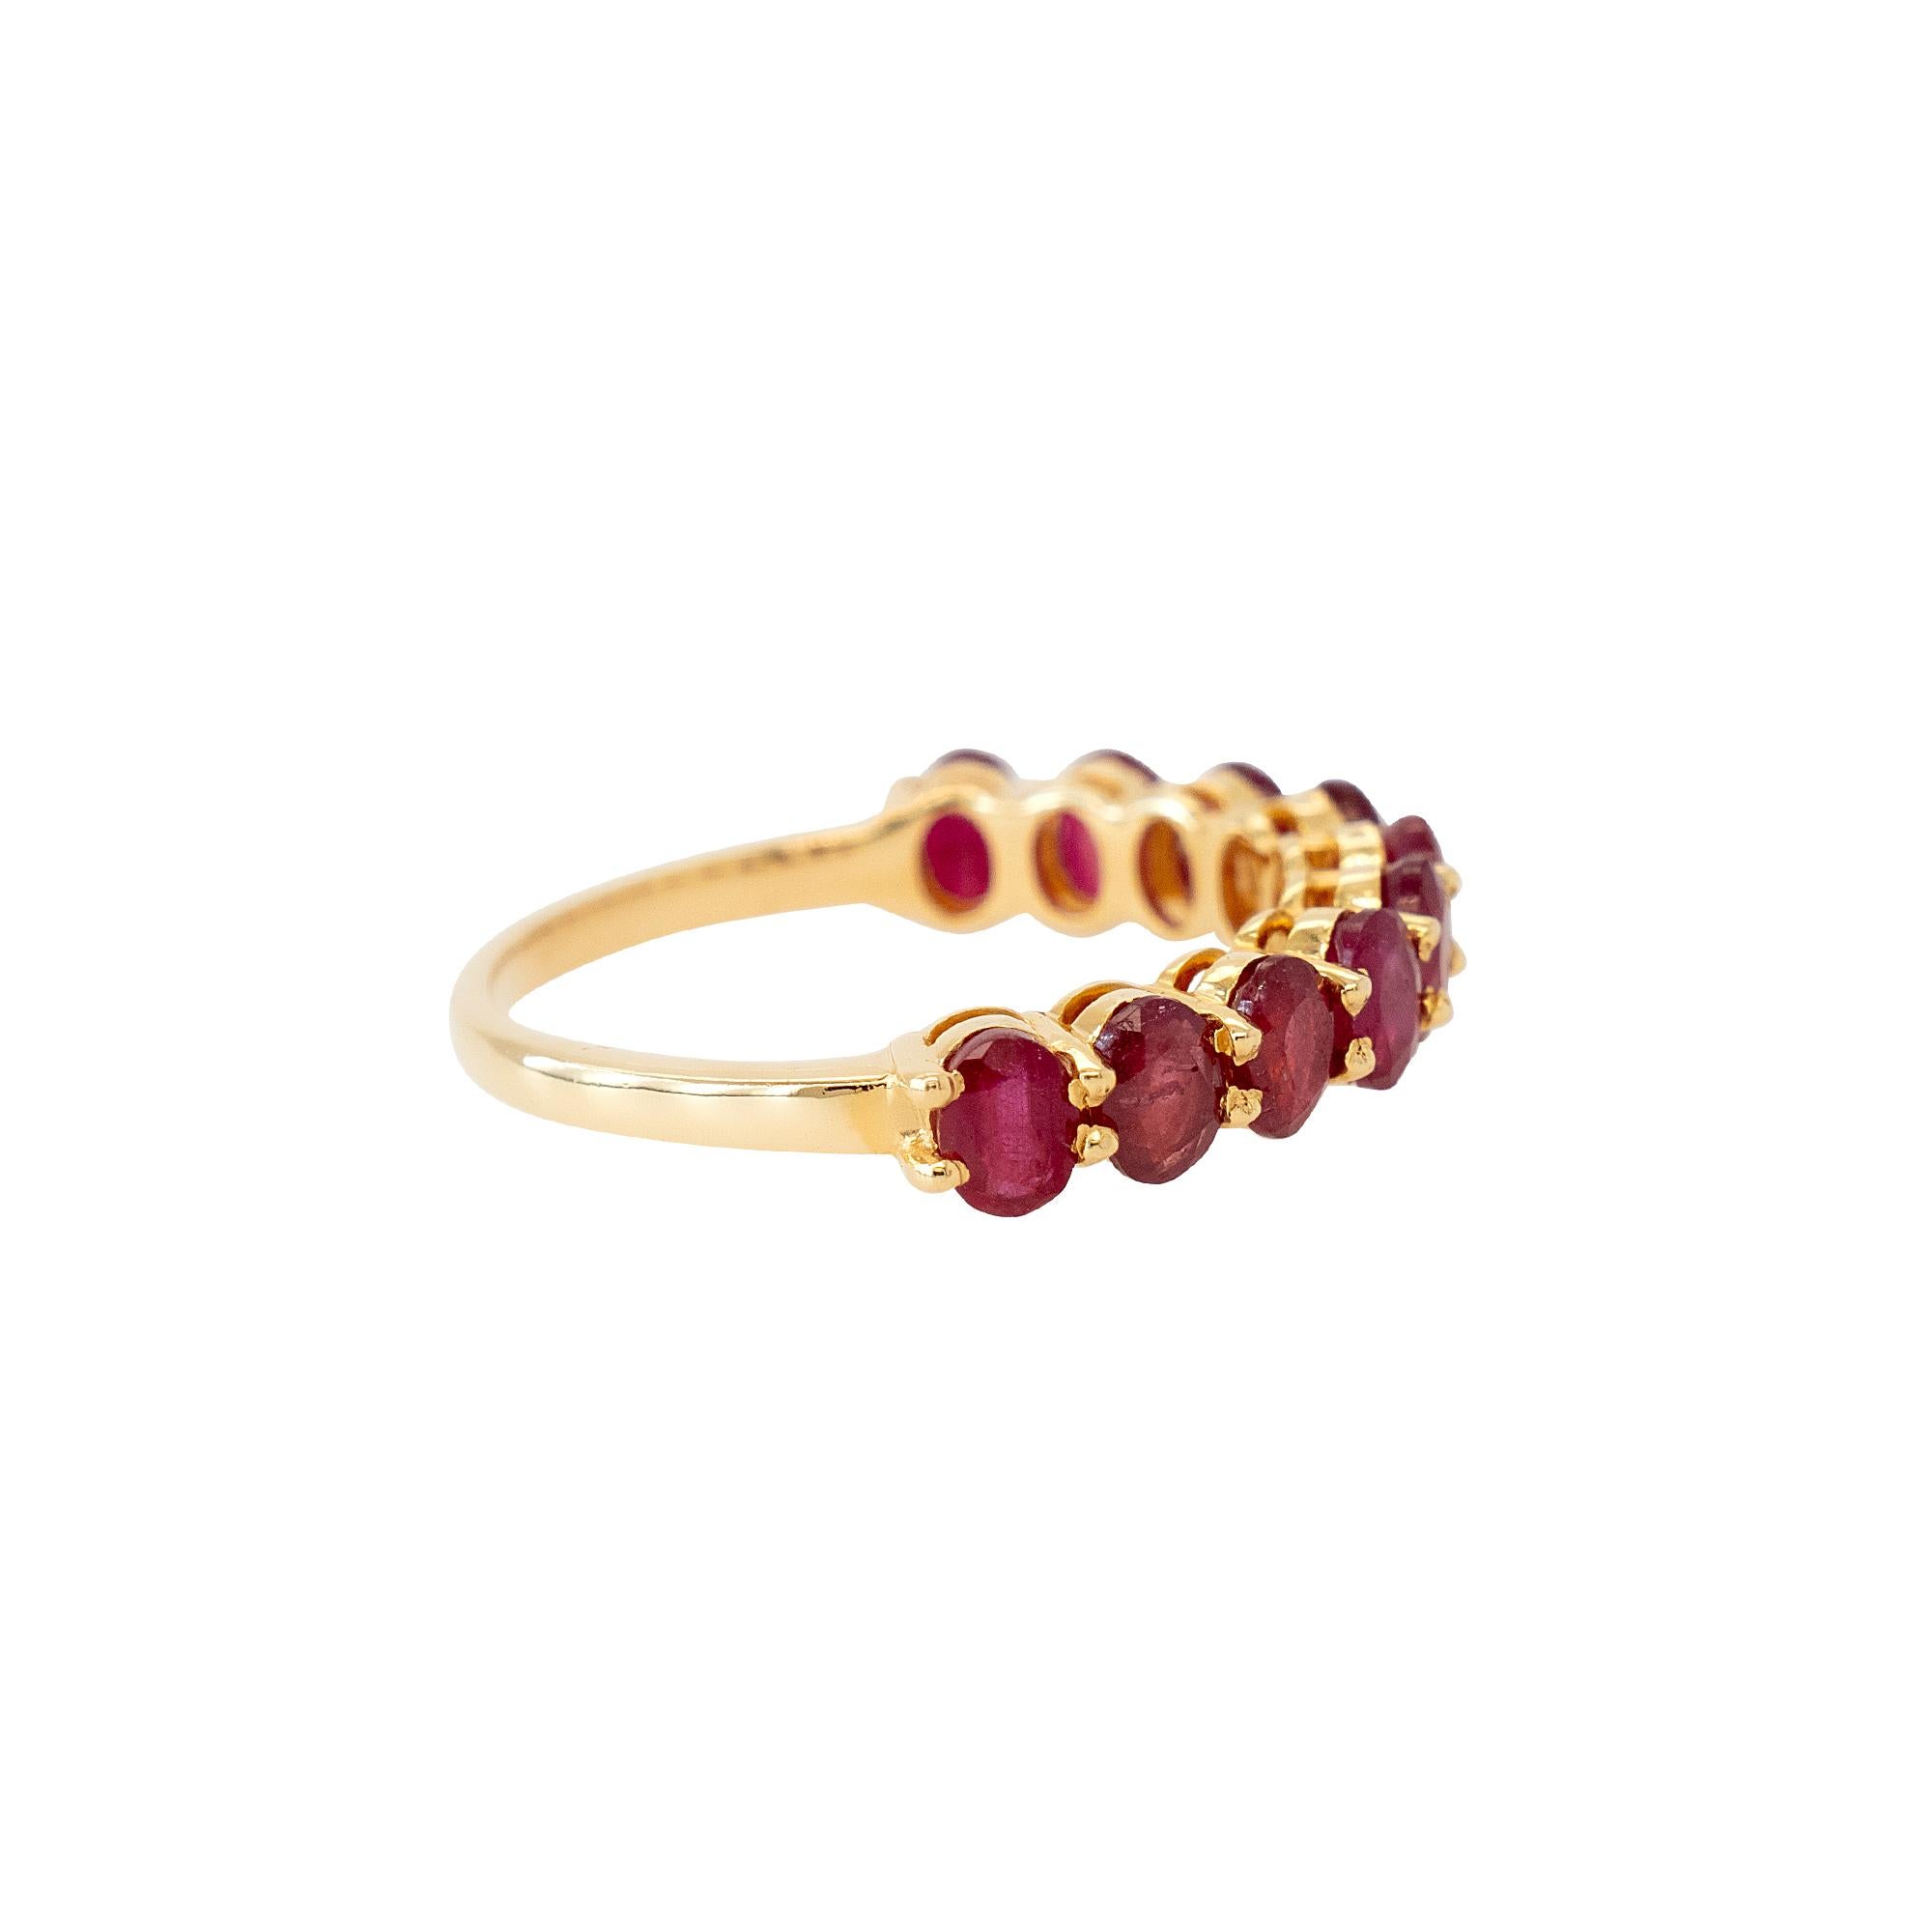 Gemstone Details: 3.00ctw Oval Cut Ruby
Ring Material: 14k Yellow Gold
Ring Size: 6 (can be sized)
Total Weight: 2.8g (1.8dwt)
This item comes with a presentation box!
SKU: R5881

Discover the allure of refined elegance with this 14k yellow gold